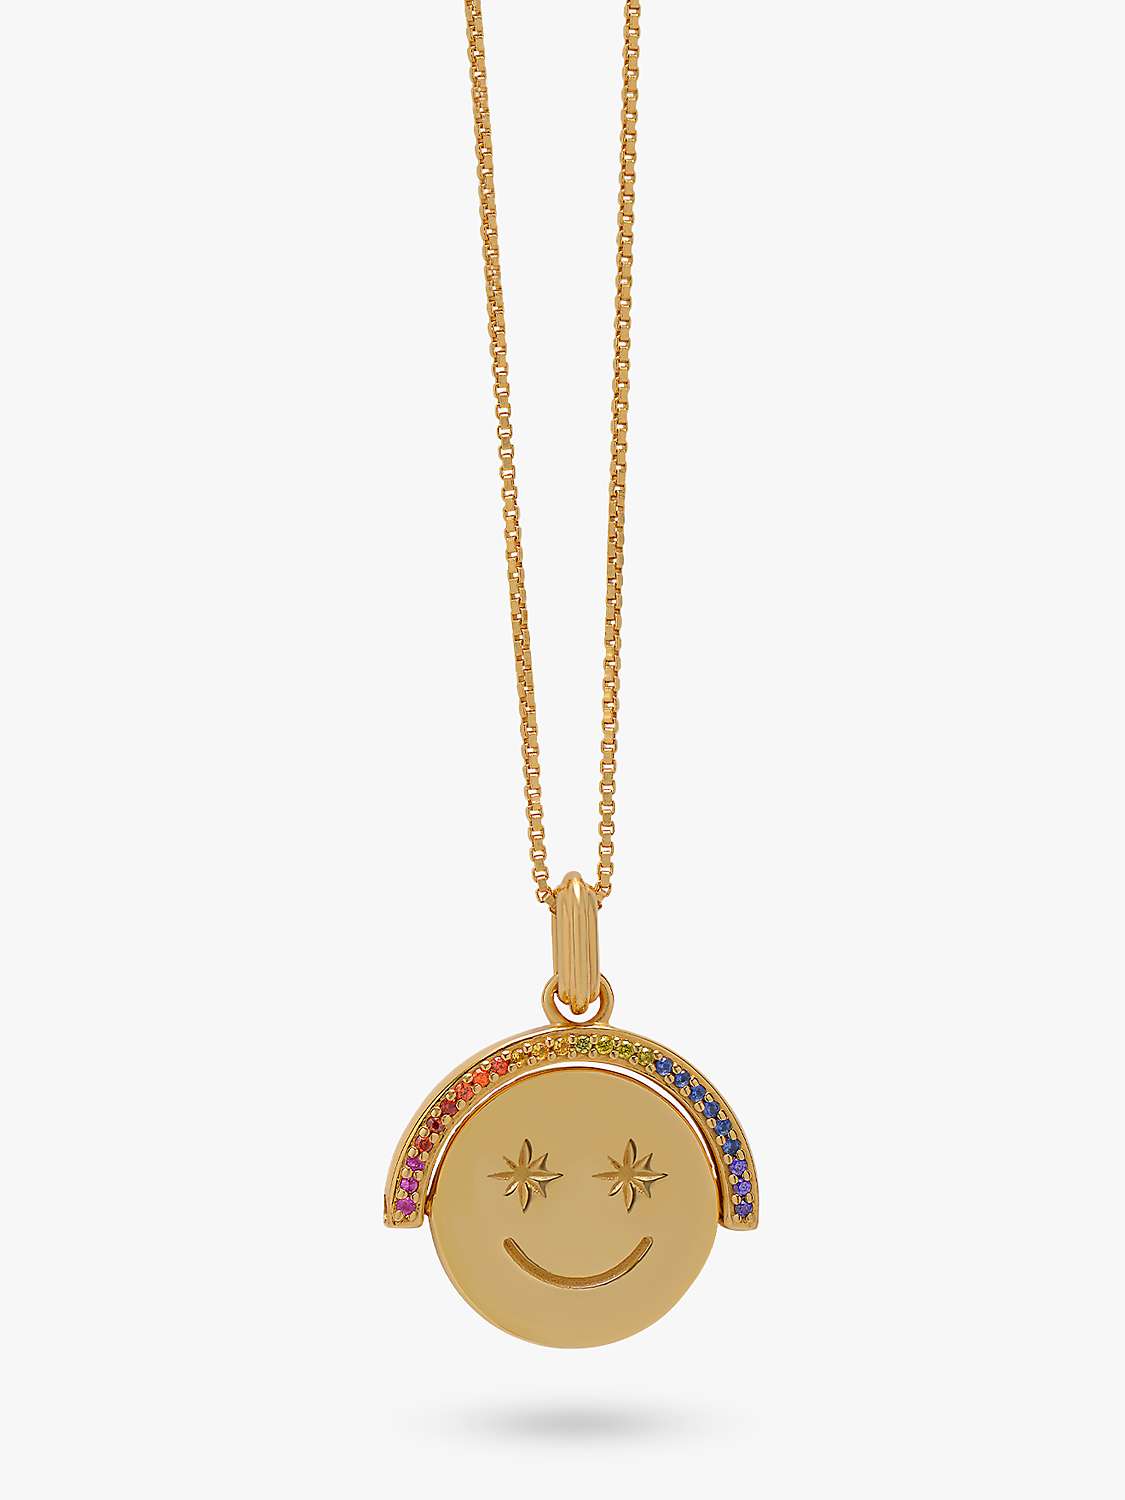 Buy Rachel Jackson London Rainbow Smiley Face Spinning Necklace, Gold Online at johnlewis.com